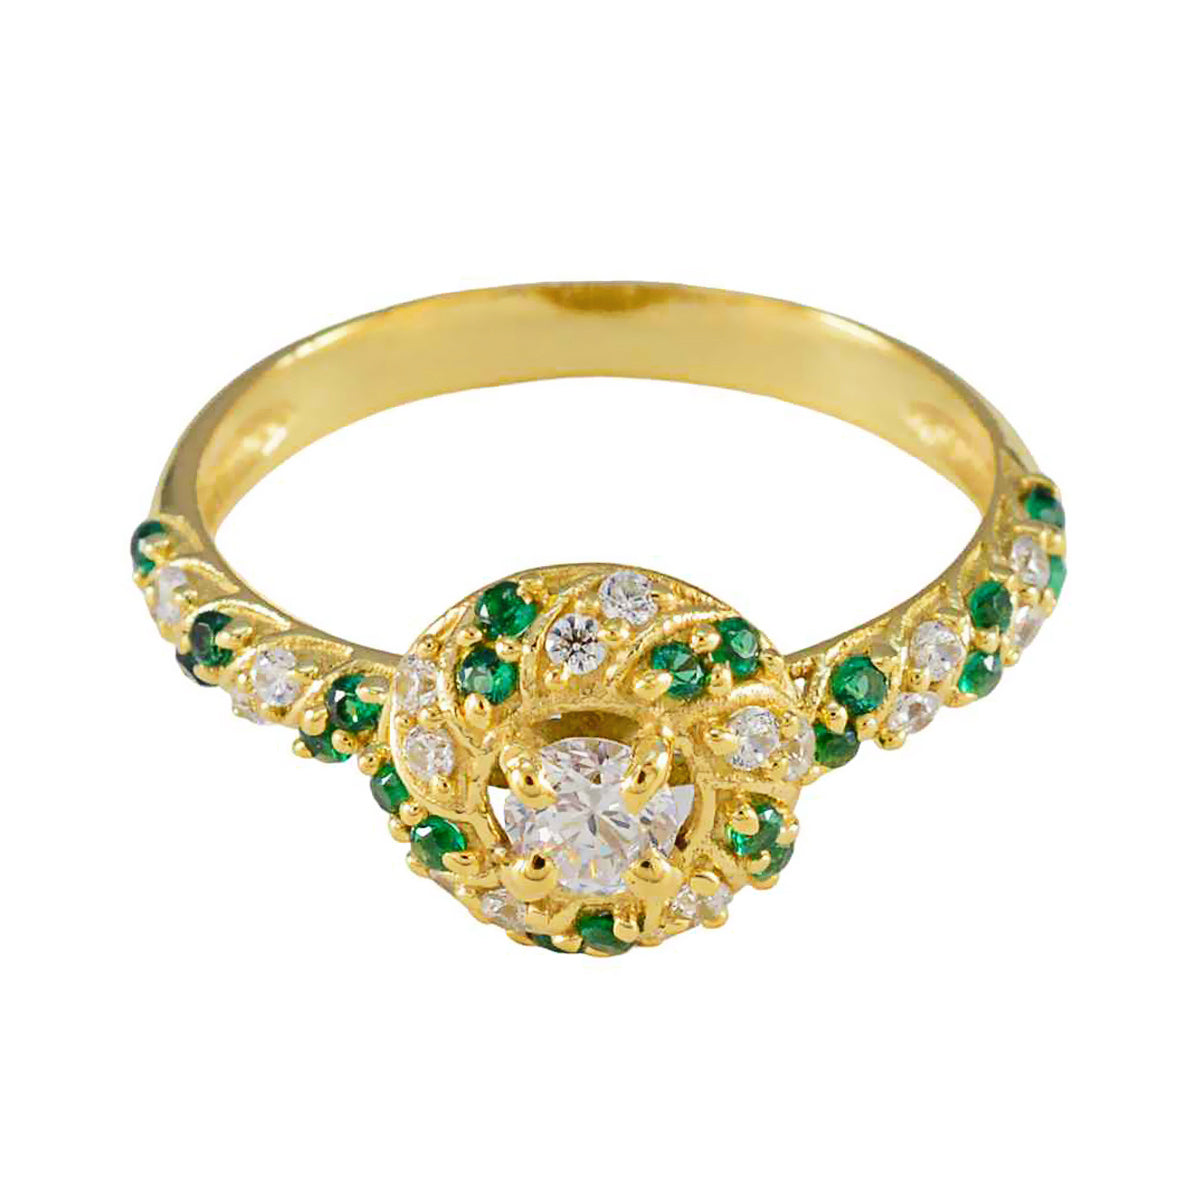 Riyo Extensive Silver Ring With Yellow Gold Plating Emerald CZ Stone Round Shape Prong Setting Bridal Jewelry Birthday Ring